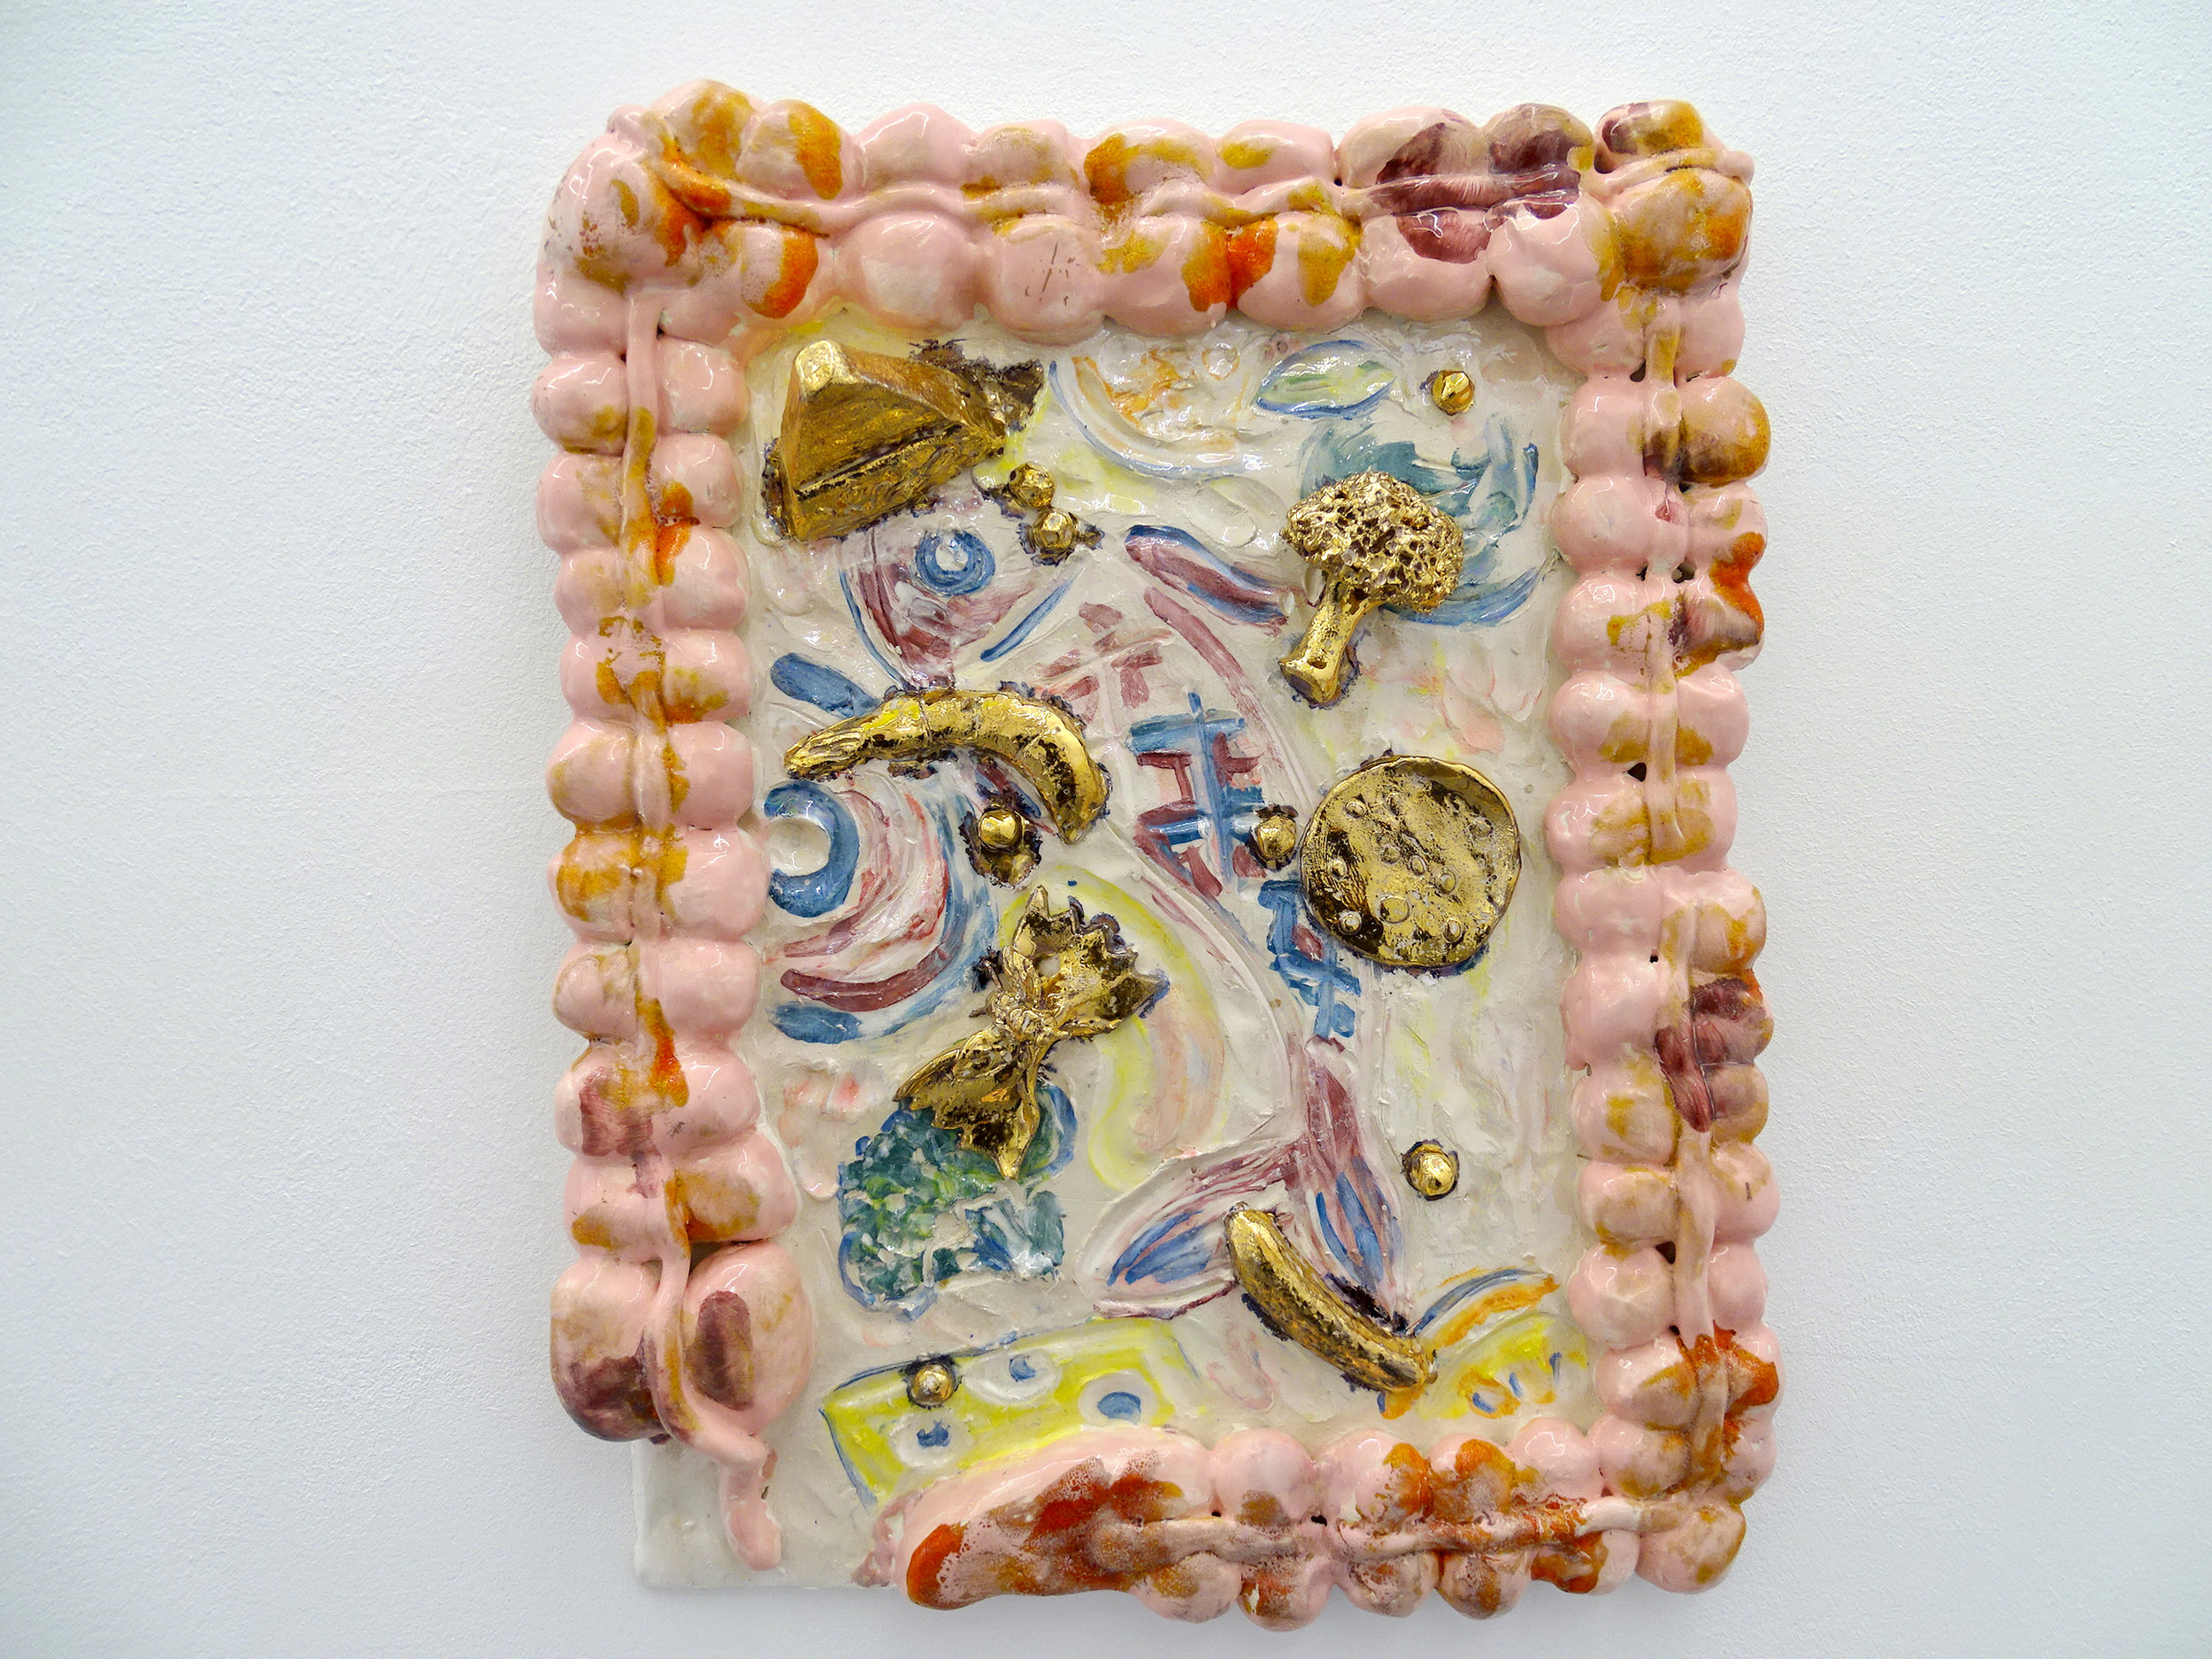 (21) Of All the Things I’ve Lost Proudick (Lindsey Mendick & Paloma Proudfoot) Hannah Barry Gallery at Ballon Rouge Club, Brussels  Lindsey Mendick I ate you too fast, 2019 Glazed ceramic   courtesy Hannah Barry Galle.jpg